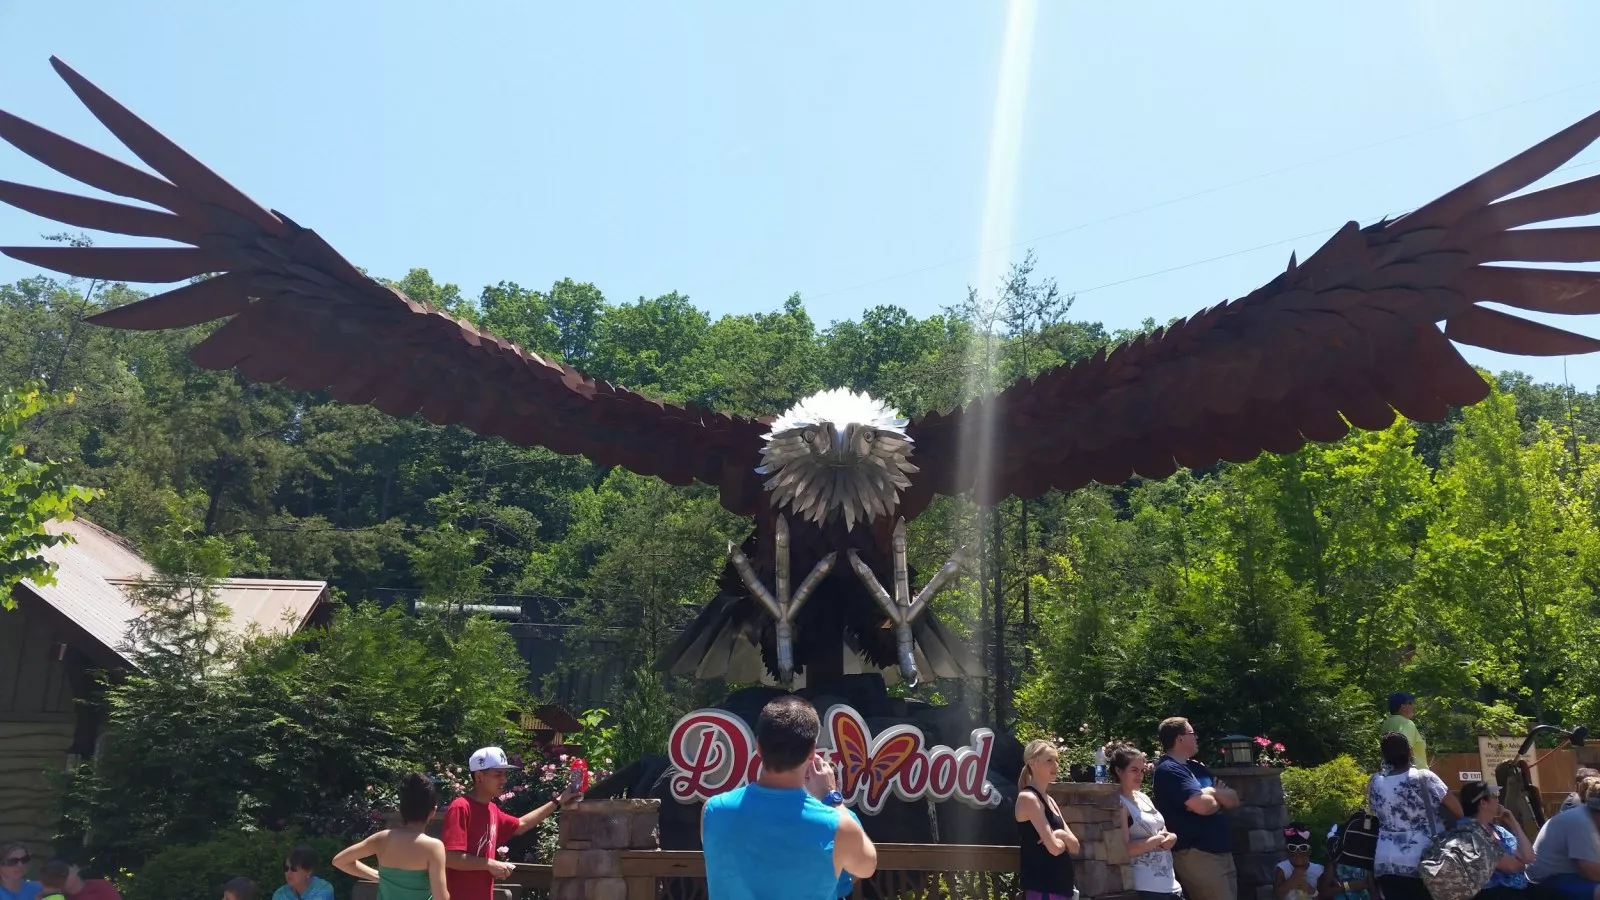 Why Do People Still Go to Dollywood?